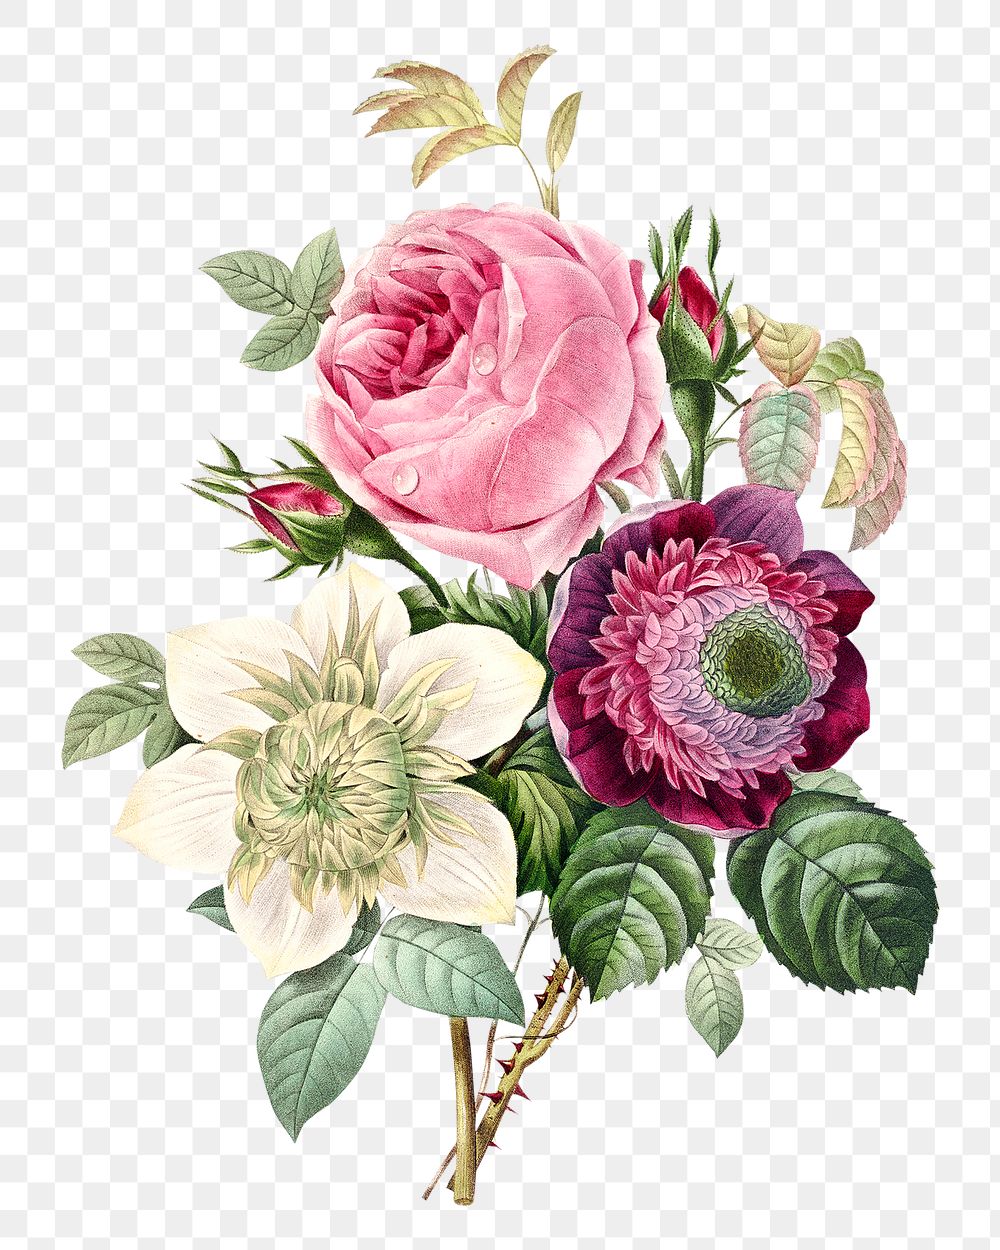 Anemone and cabbage rose flower png botanical illustration, remixed from artworks by Pierre-Joseph Redout&eacute;